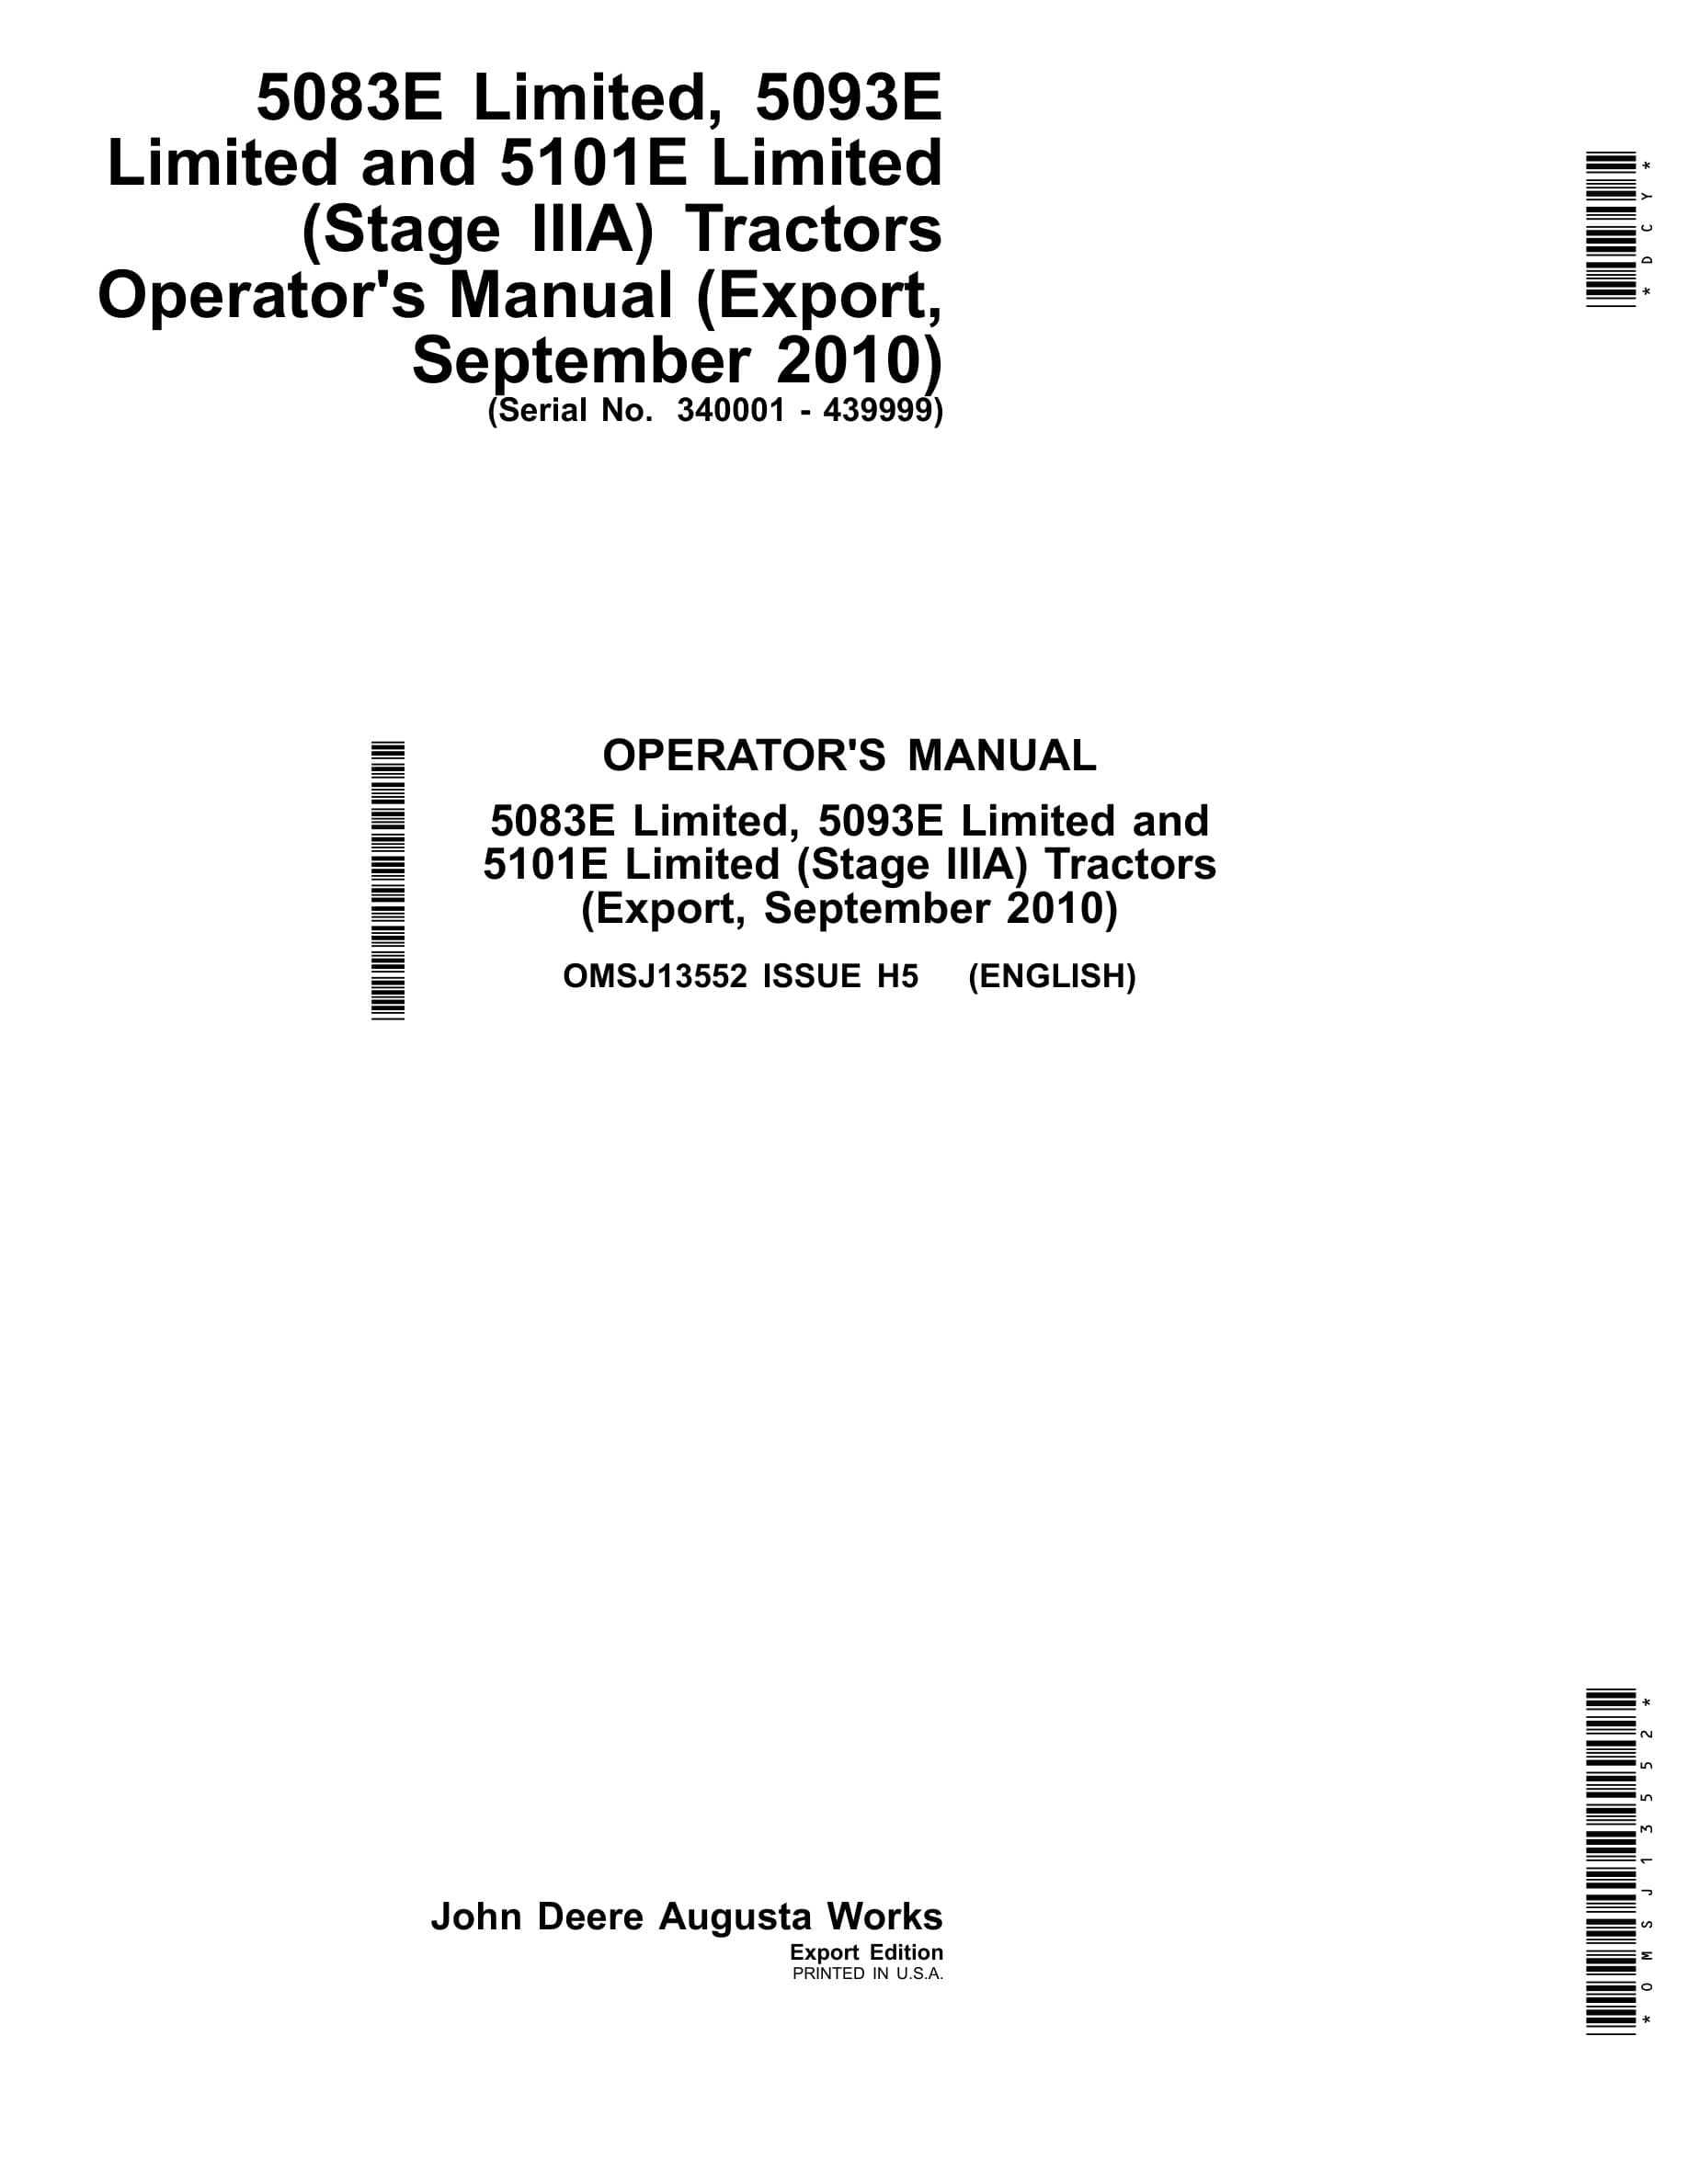 John Deere 5083e Limited, 5093e Limited And 5101e Limited (stage Iiia) Tractors Operator Manuals OMSJ13552-1